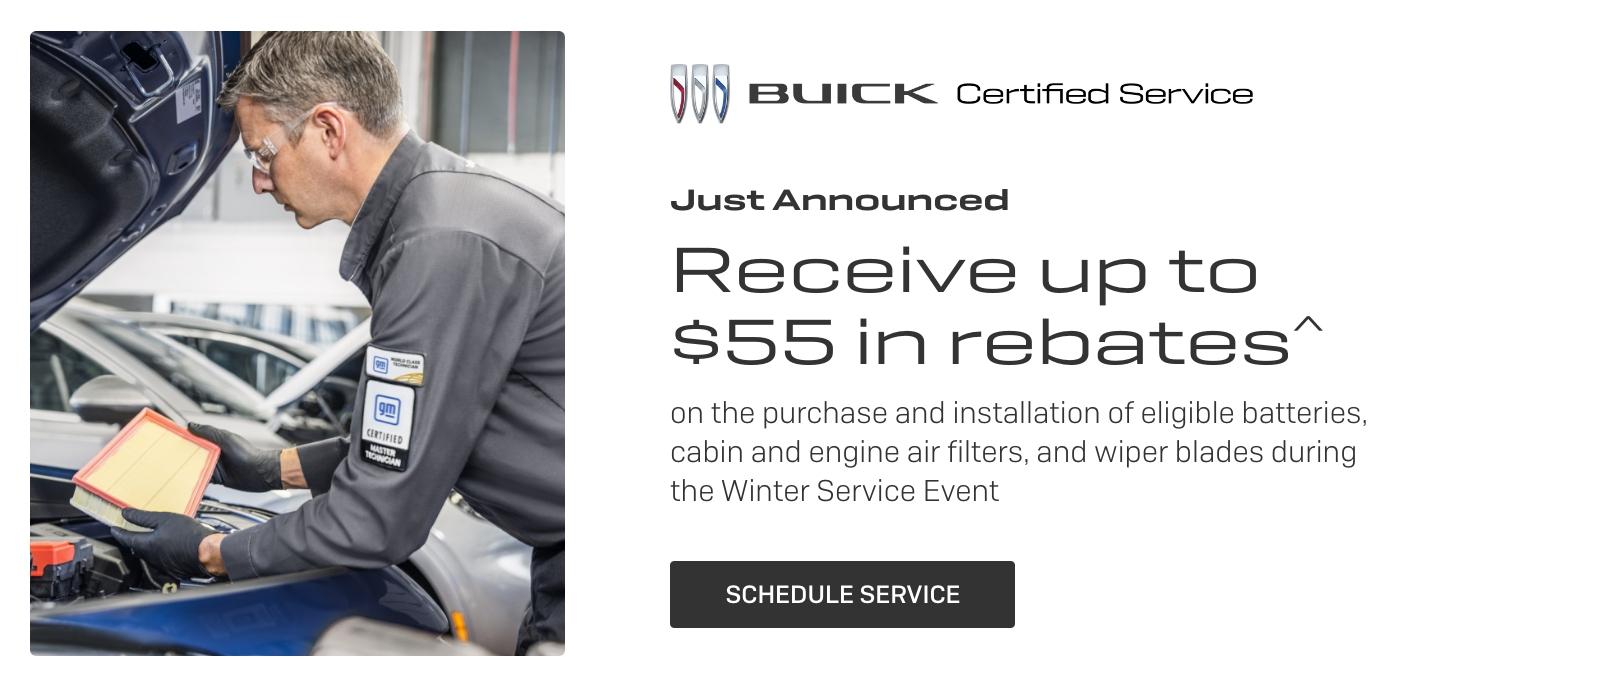 JUST ANNOUNCED, UP TO $55 IN REBATES.